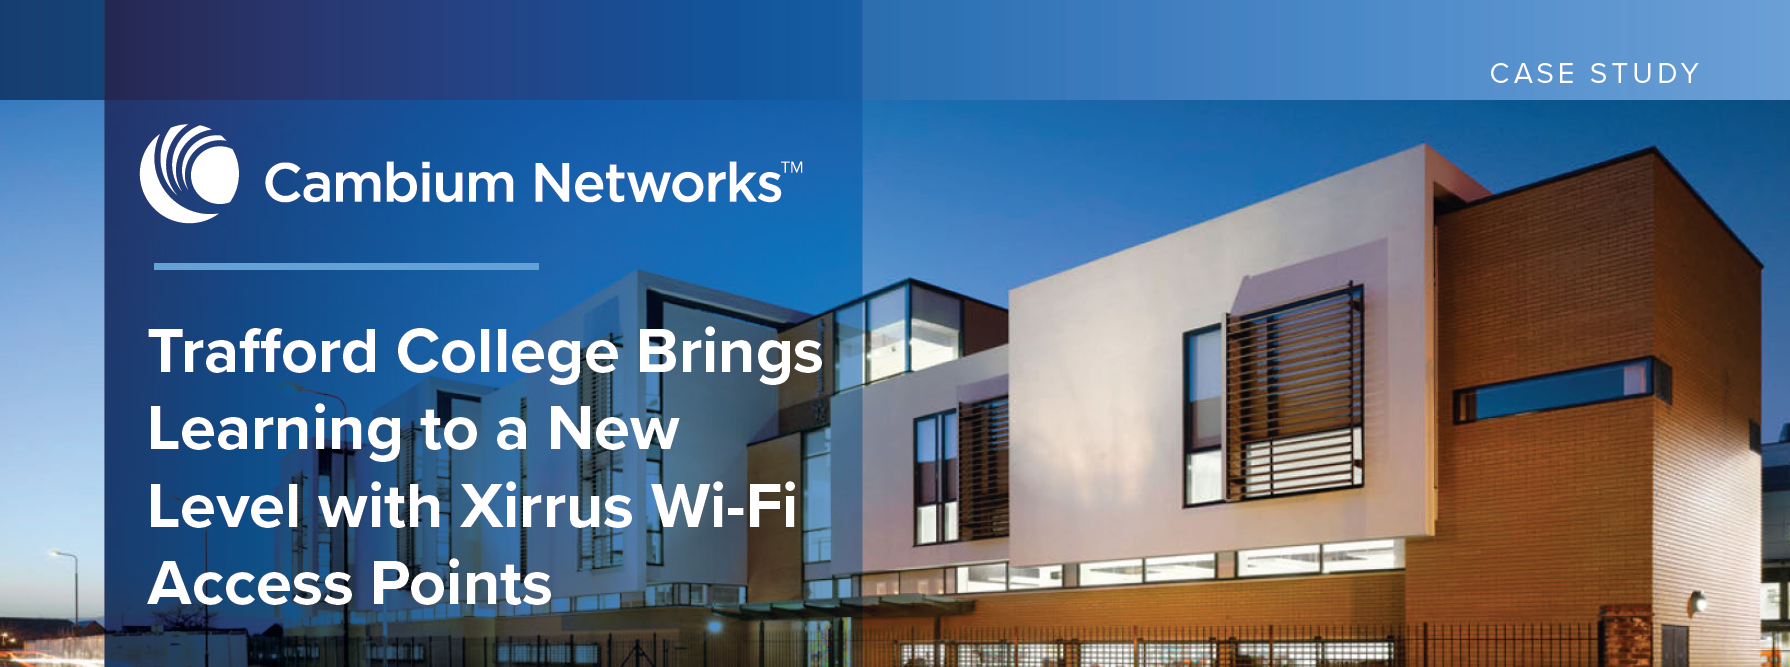 Case Study: Trafford College Brings Learning to a New Level with Xirrus Wi-Fi Access Points